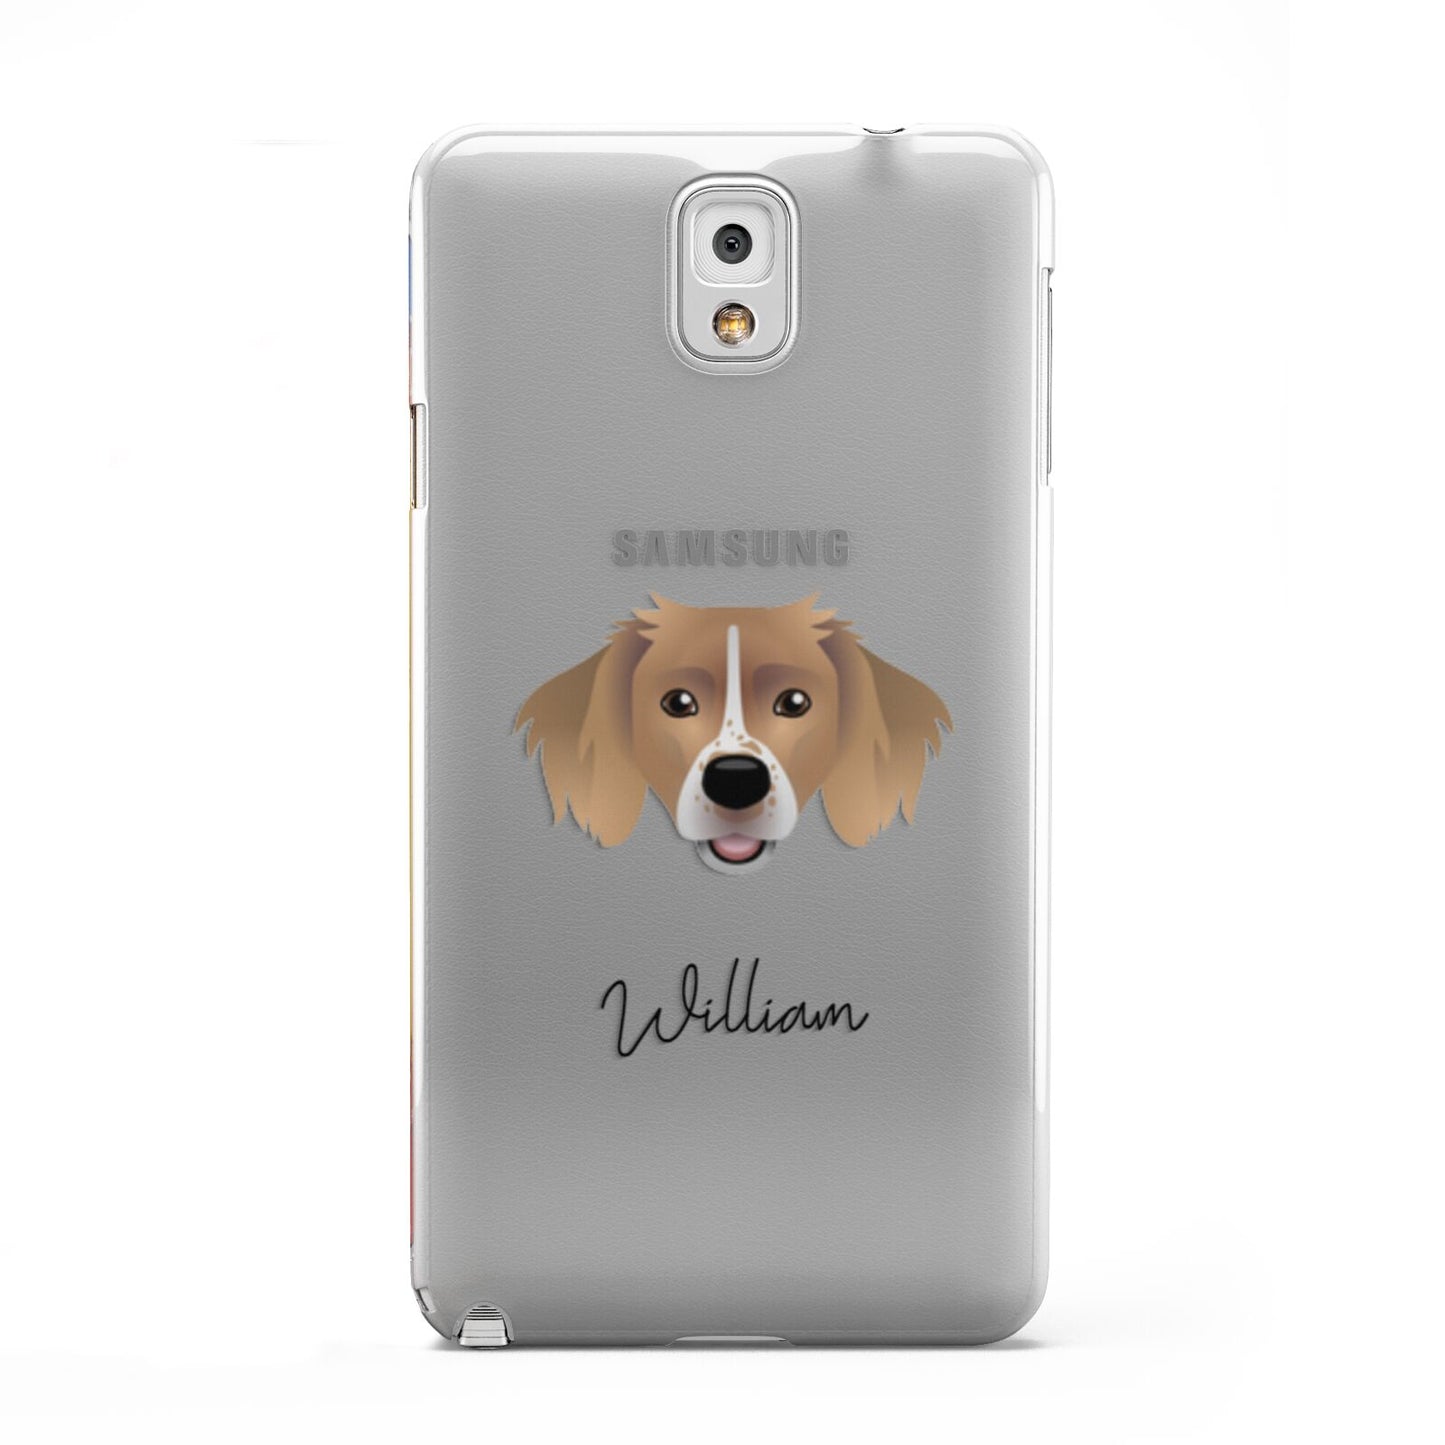 Sprollie Personalised Samsung Galaxy Note 3 Case